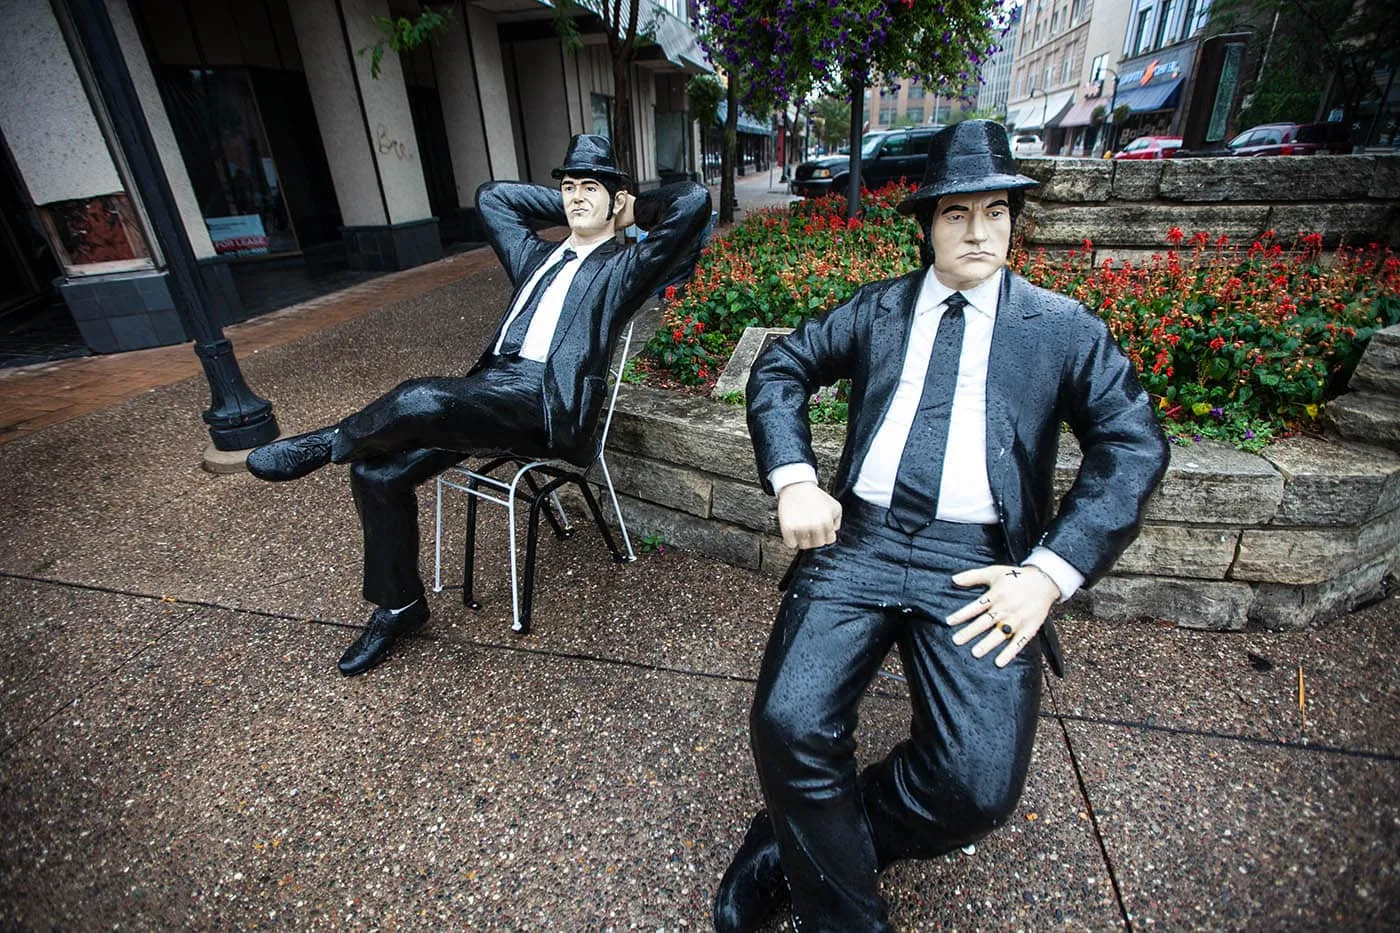 Blues Brothers Statues in Rock Island, Illinois